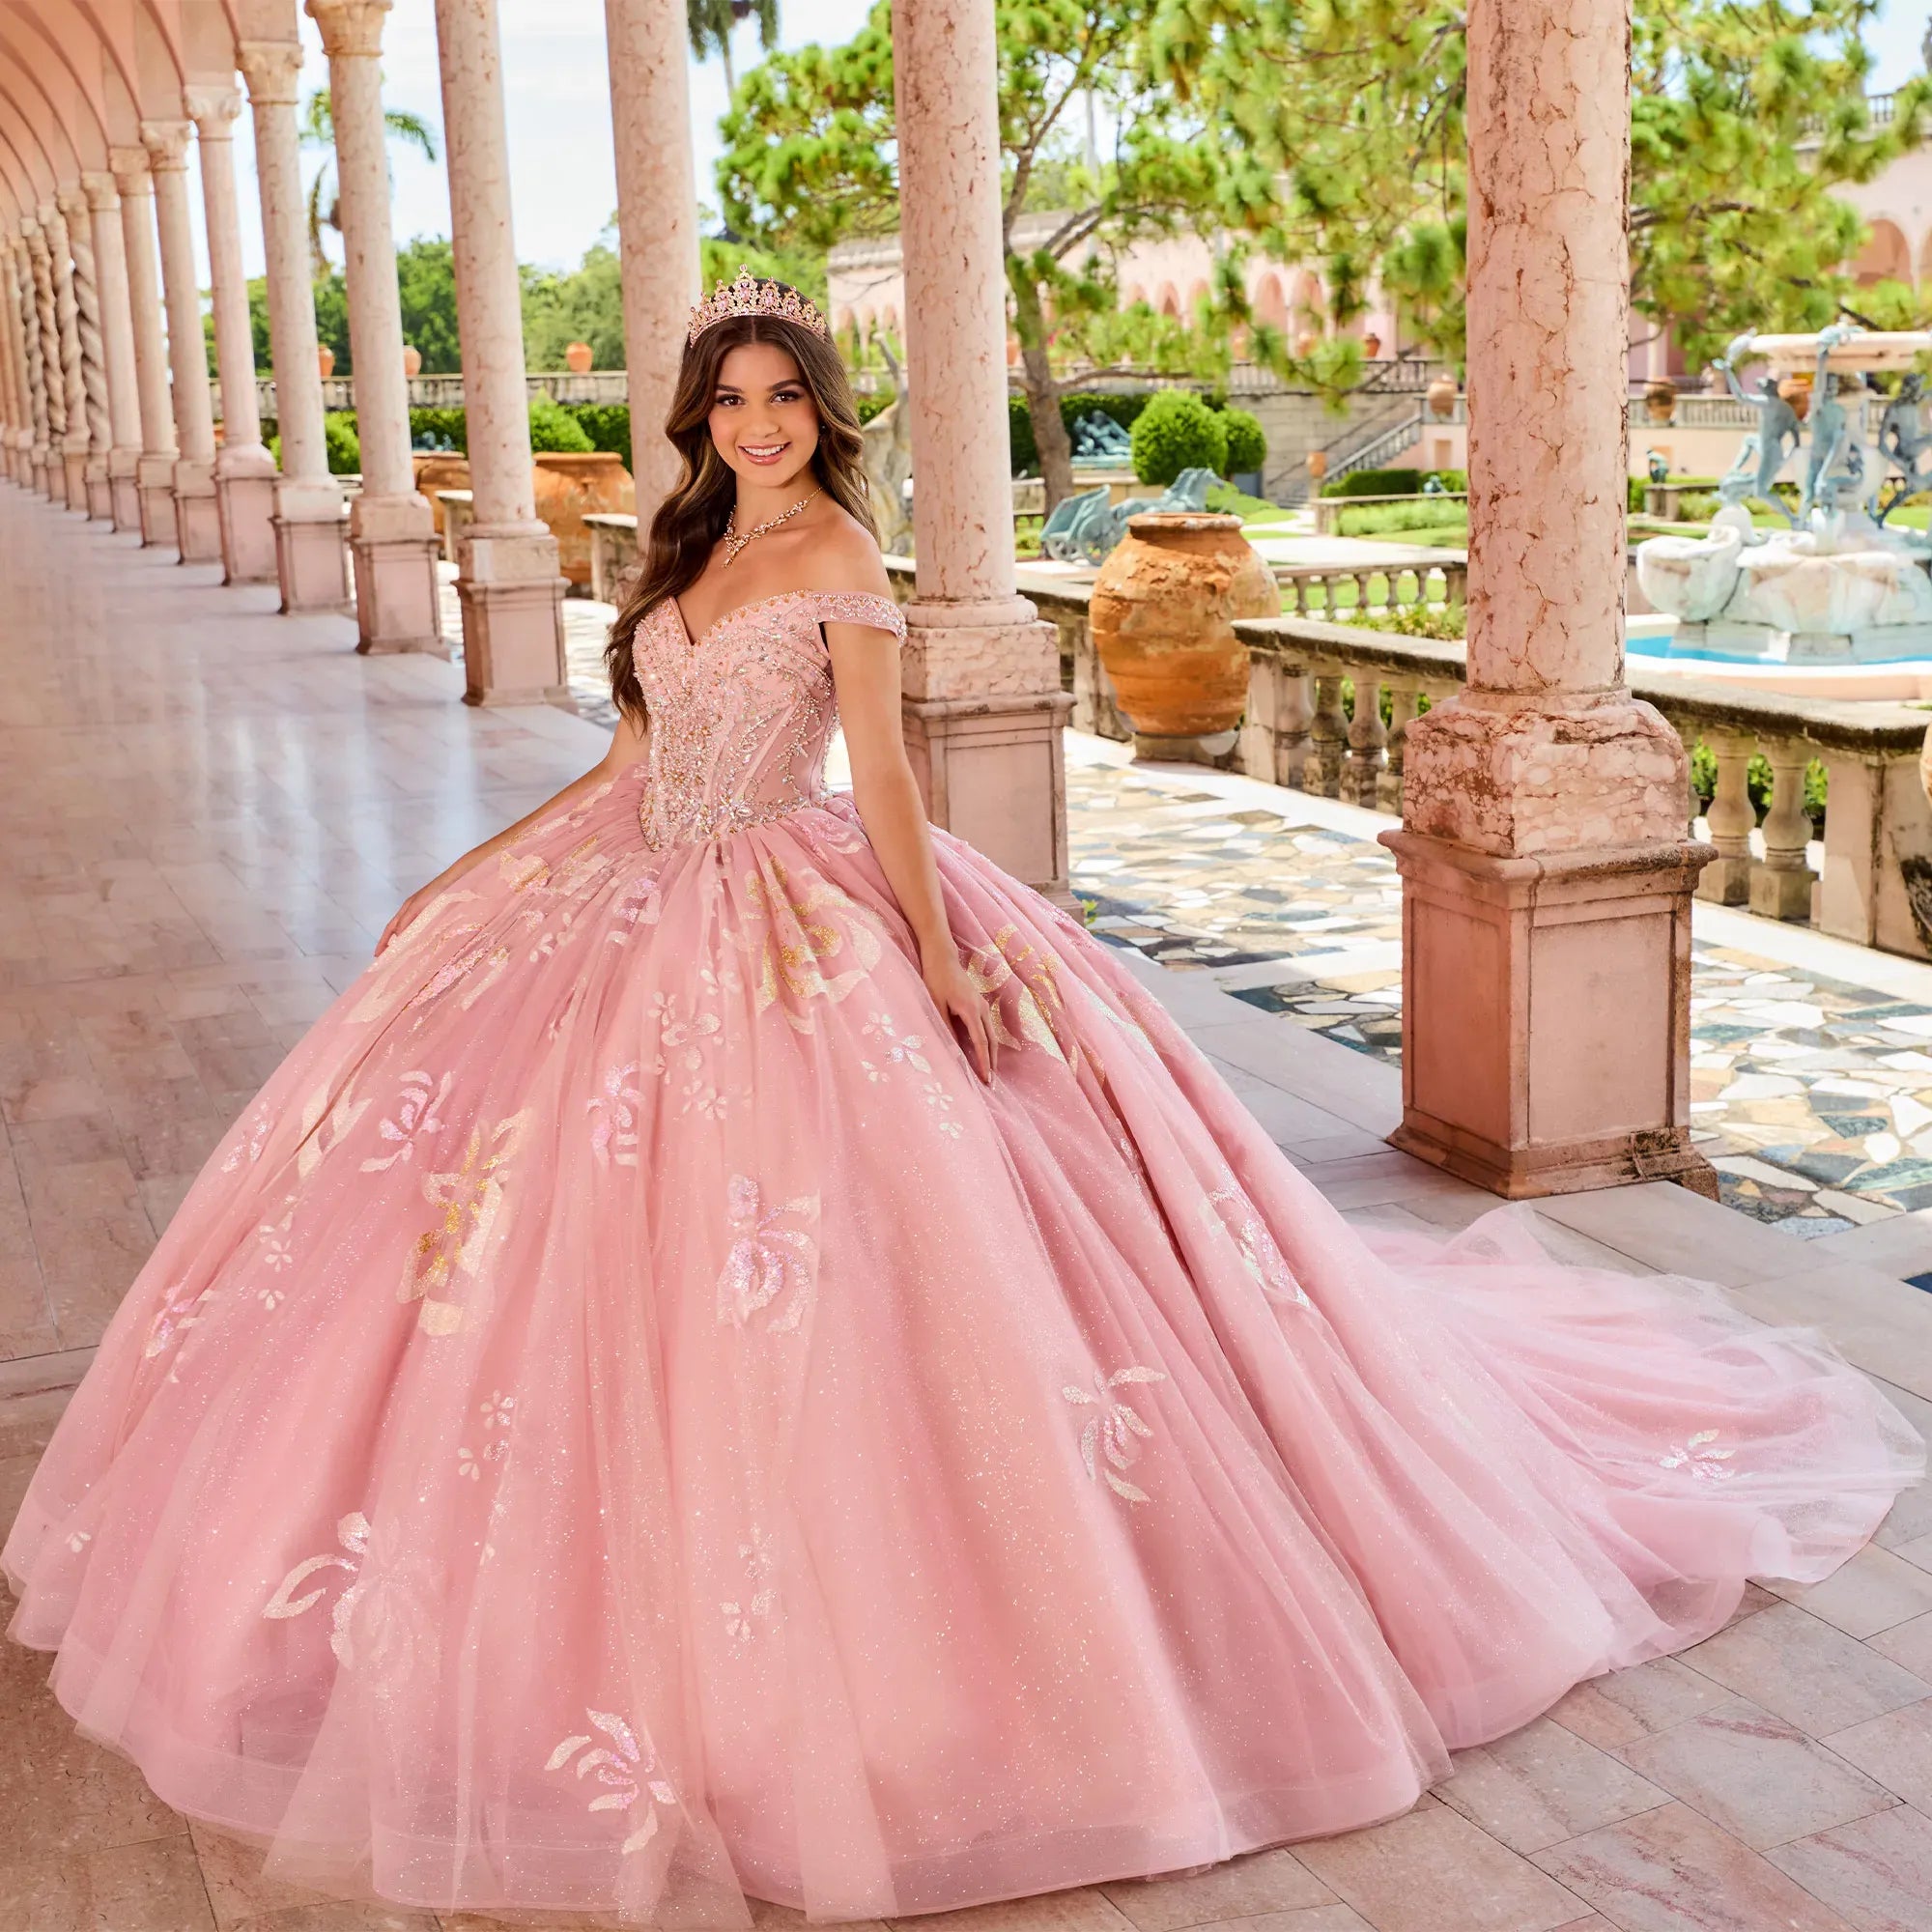 Image of Princesa by Ariana Vara PR30156 - Off-Shoulder Sequined Prom Gown